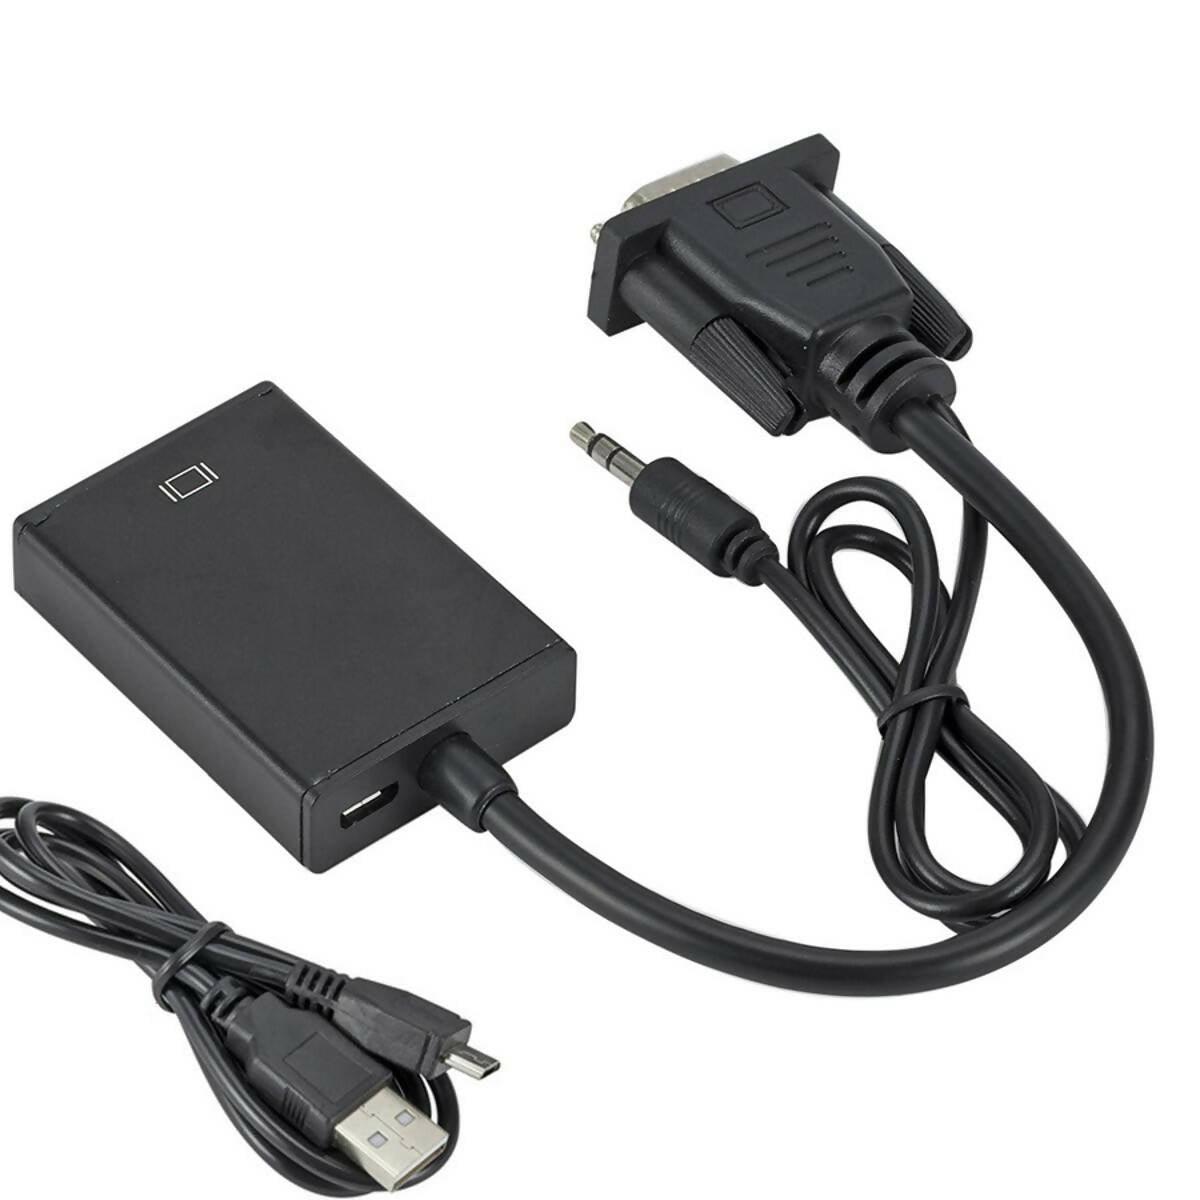 Vga To Hdmi Converter 1080p Hd Adapter With Audio Cable For Hdtv Pc Laptop Tv - ValueBox